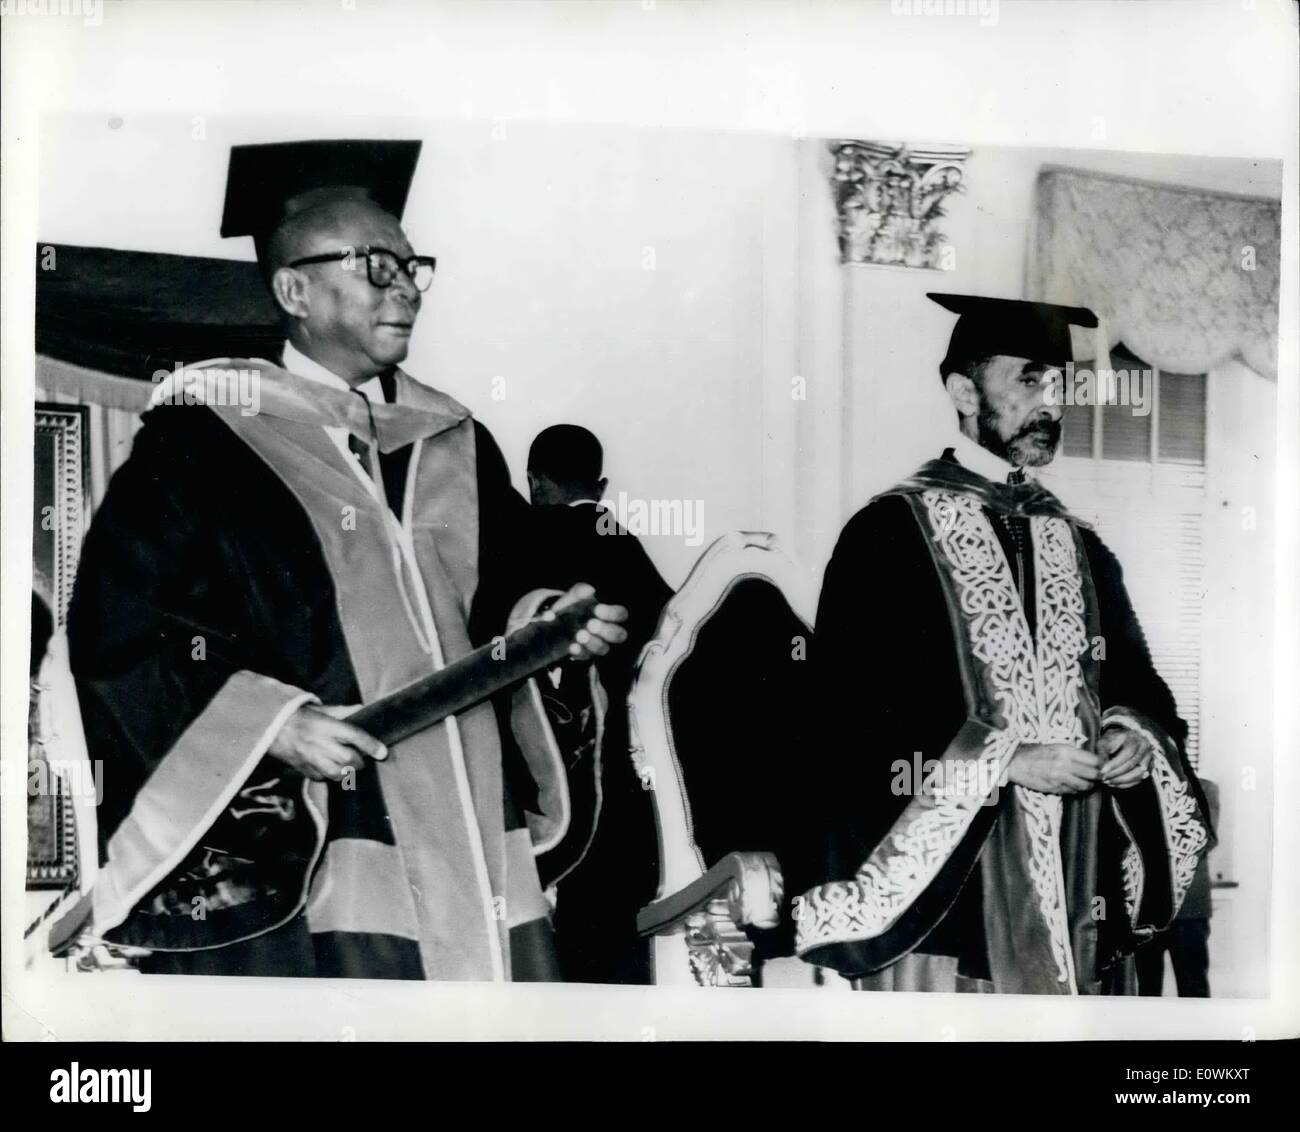 May 05, 1963 - President Tubman Honoured.: H.K.President William Tubman of Liberia, who is in Addis Ababa, Ethiopia, for the All-African Summit Conference, has been conferred with an Honorary Doctor of Law Degree at the University. Photo shows.: President Tubman (left) with Emperor Haile Selassie after receiving his Degree. Stock Photo